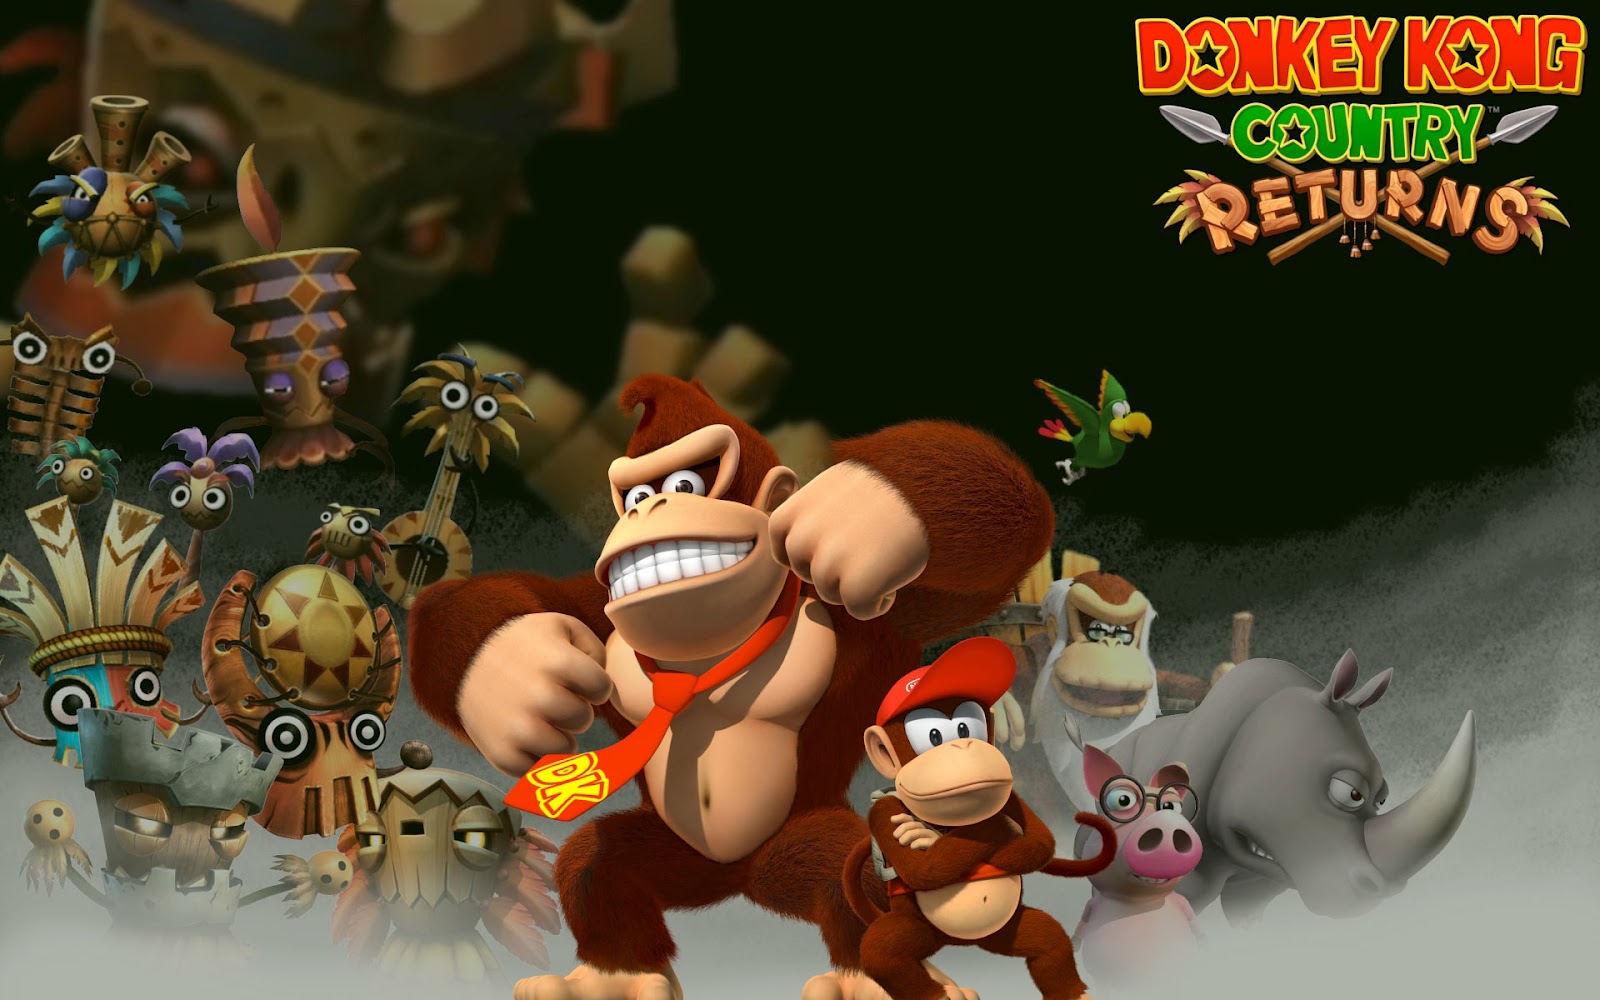 Donkey Kong Country Wallpaper Ing Gallery